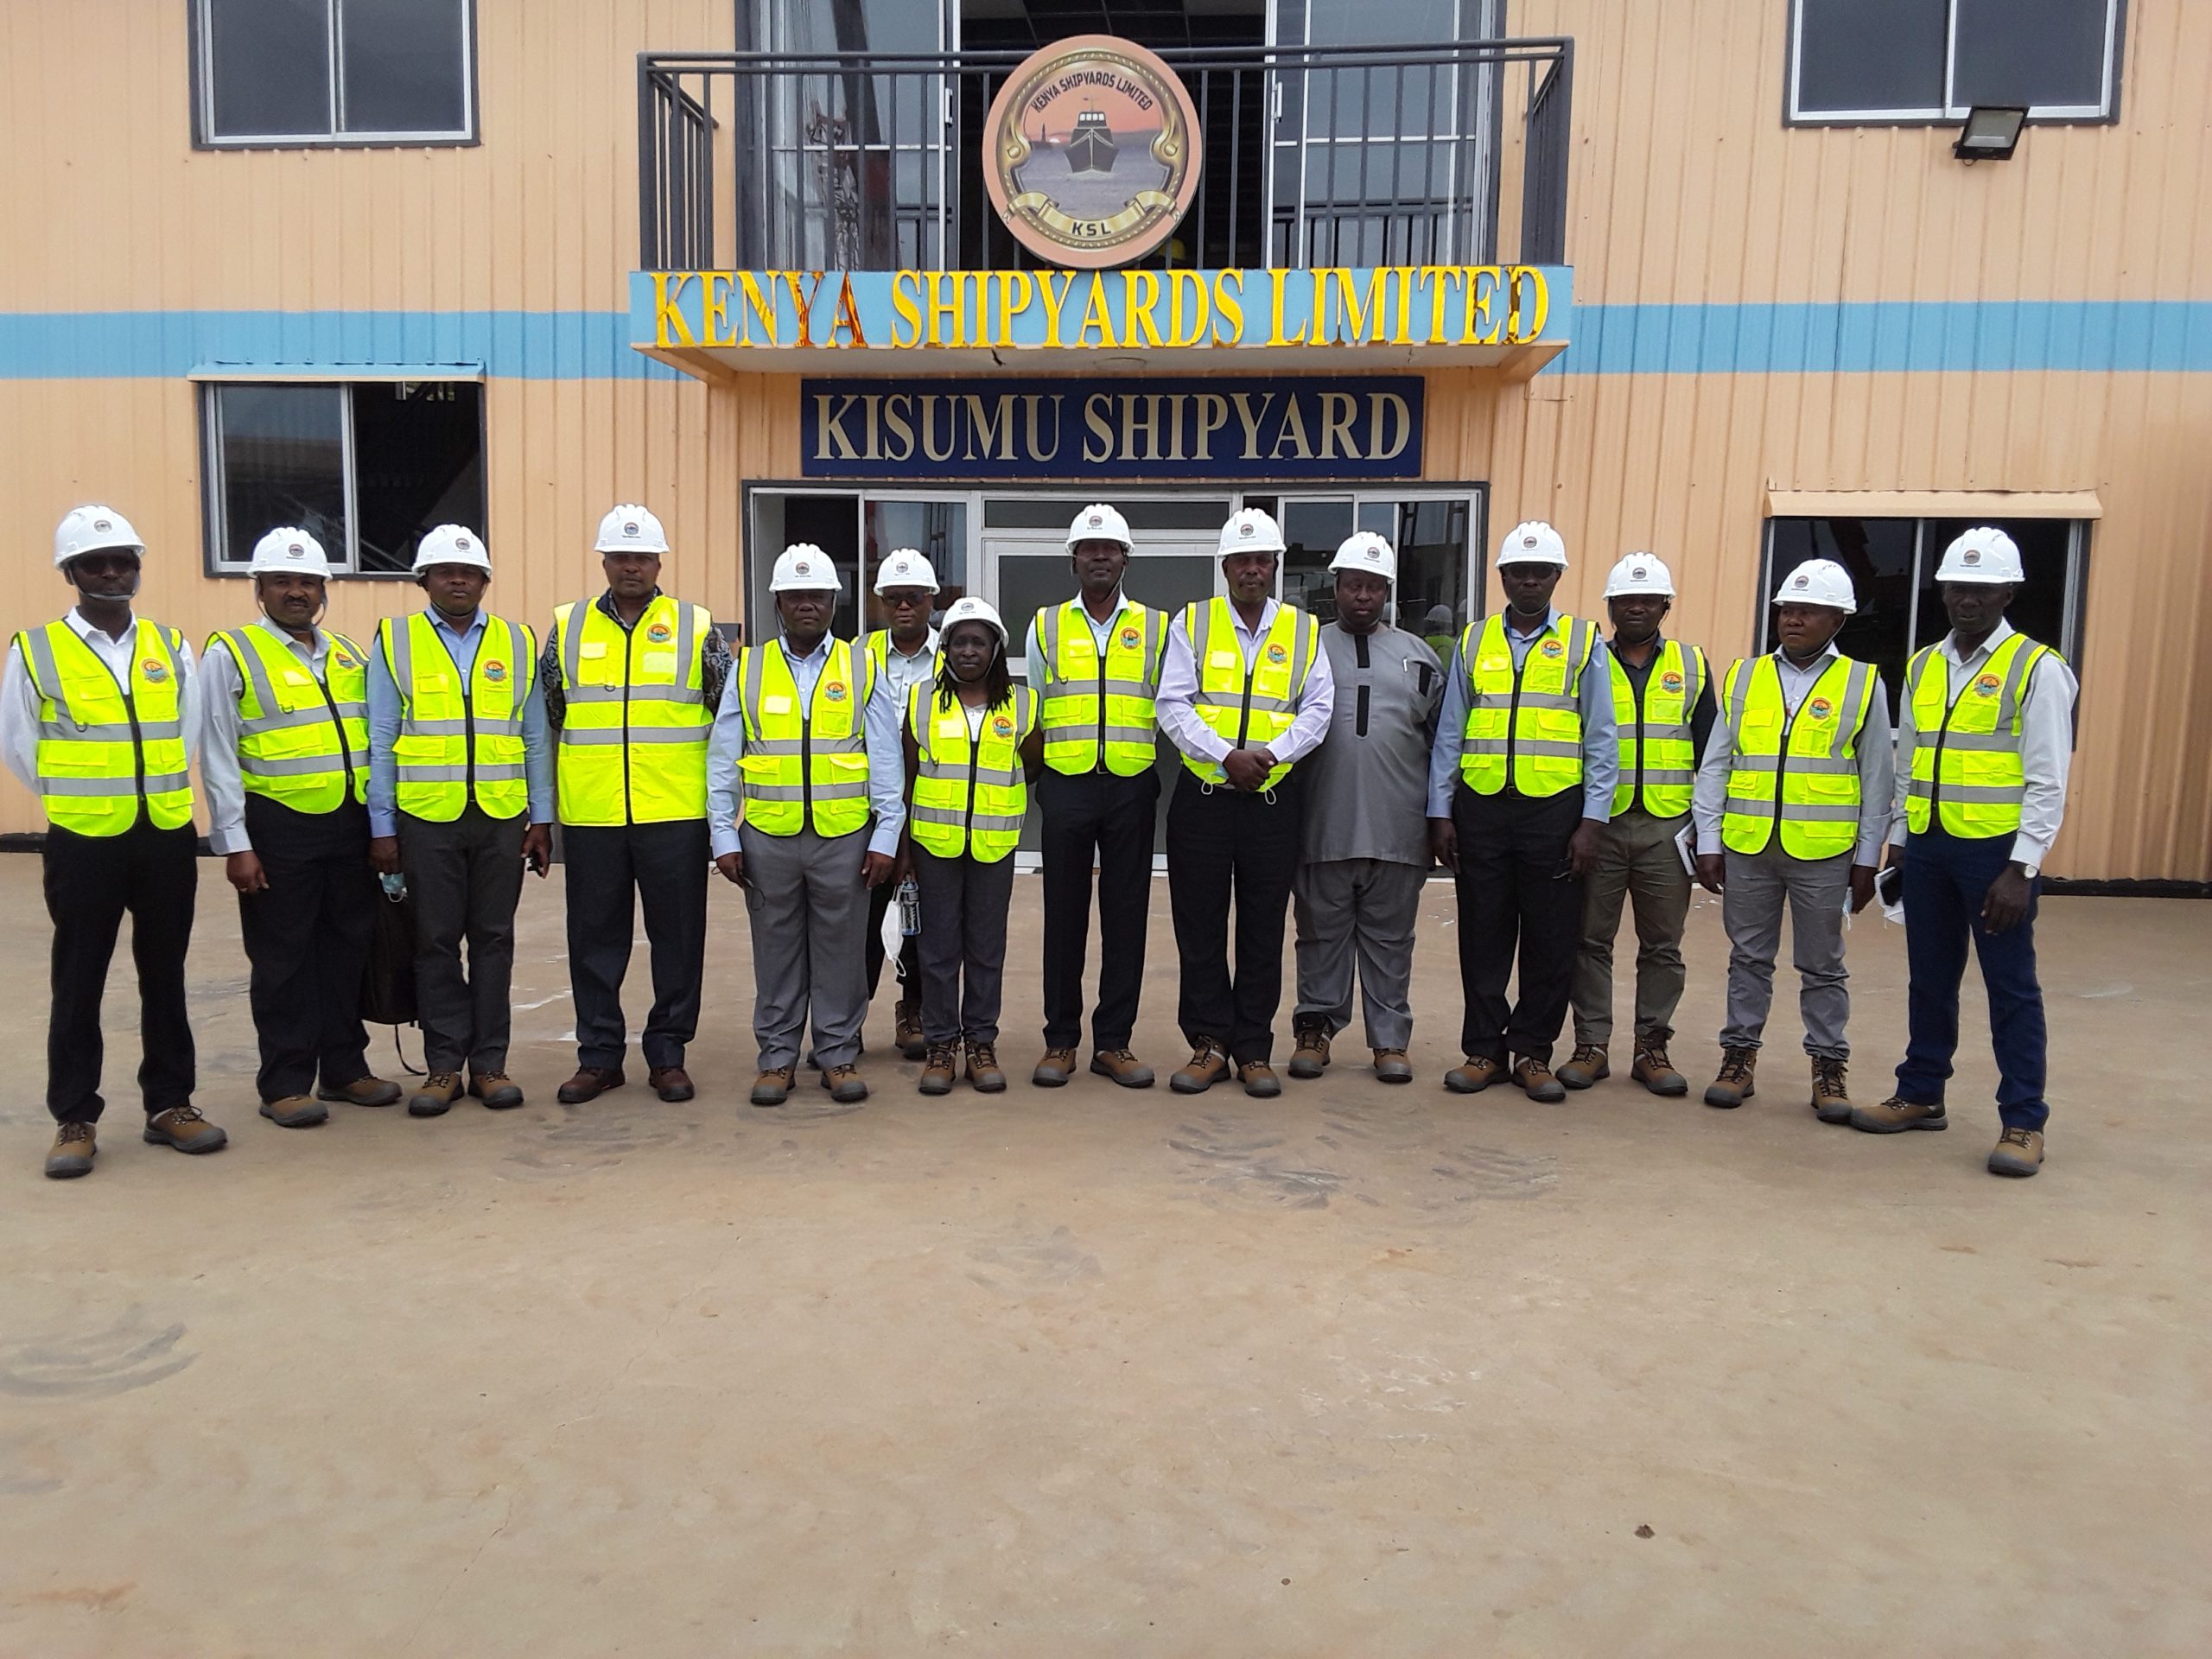 SDS Air Team Leader and participants of Team E of course 24 participants during the visit to Kenya Shipyard Ltd KISUMU on 30.11.2021